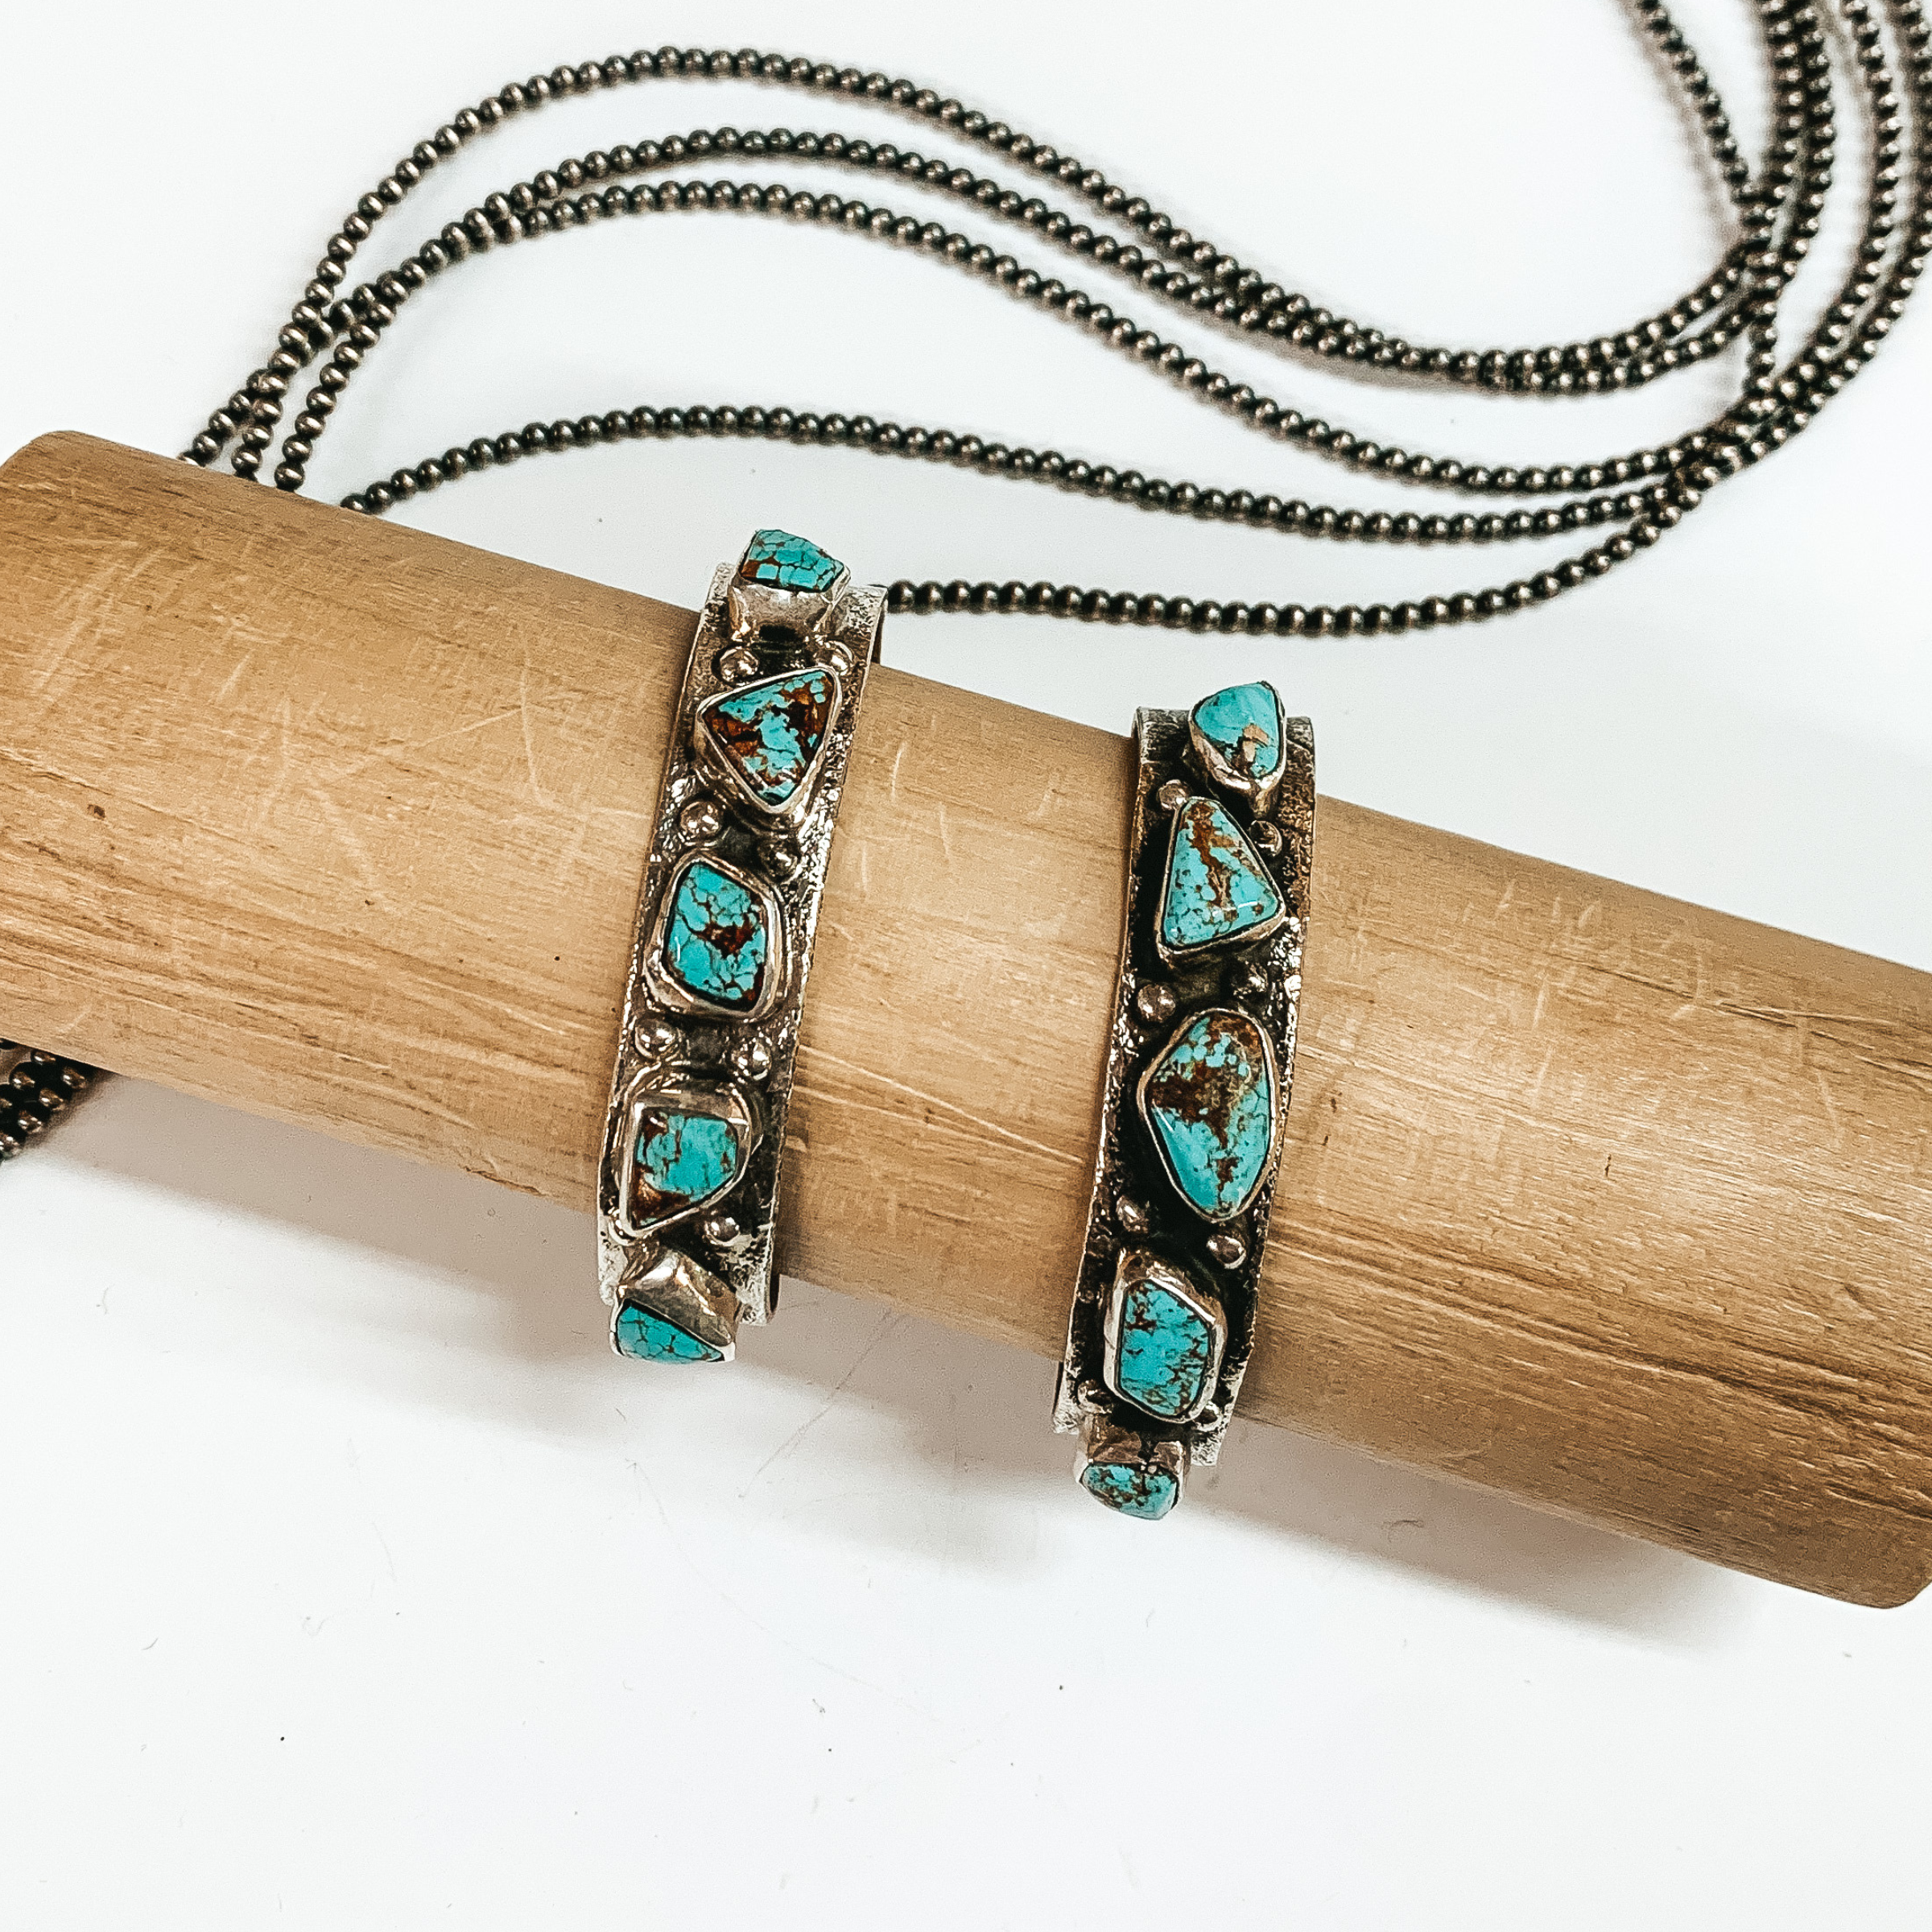 Two silver bracelets with engraving details and irregular shaped turquoise stones. This bracelet is pictured on a on a wooden bracelet holder on a white background with silver beads behind it. 